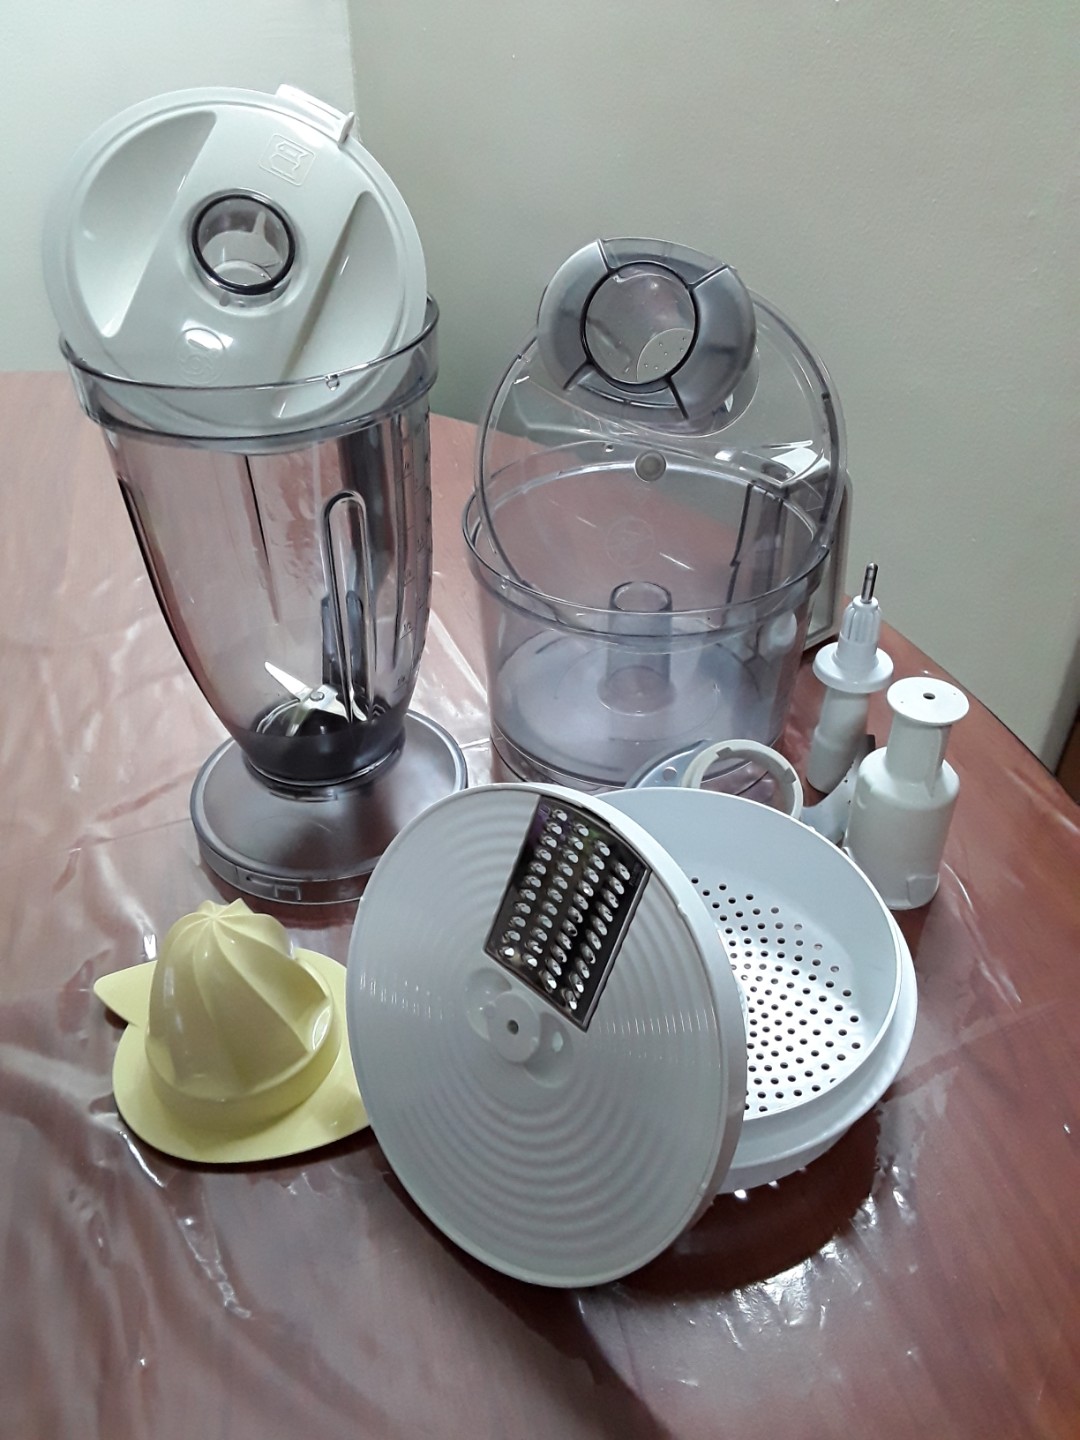 Bosch MCM4100 Processor with Accessories for Sale!, TV & Appliances, Kitchen Appliances, Hand & Stand Carousell